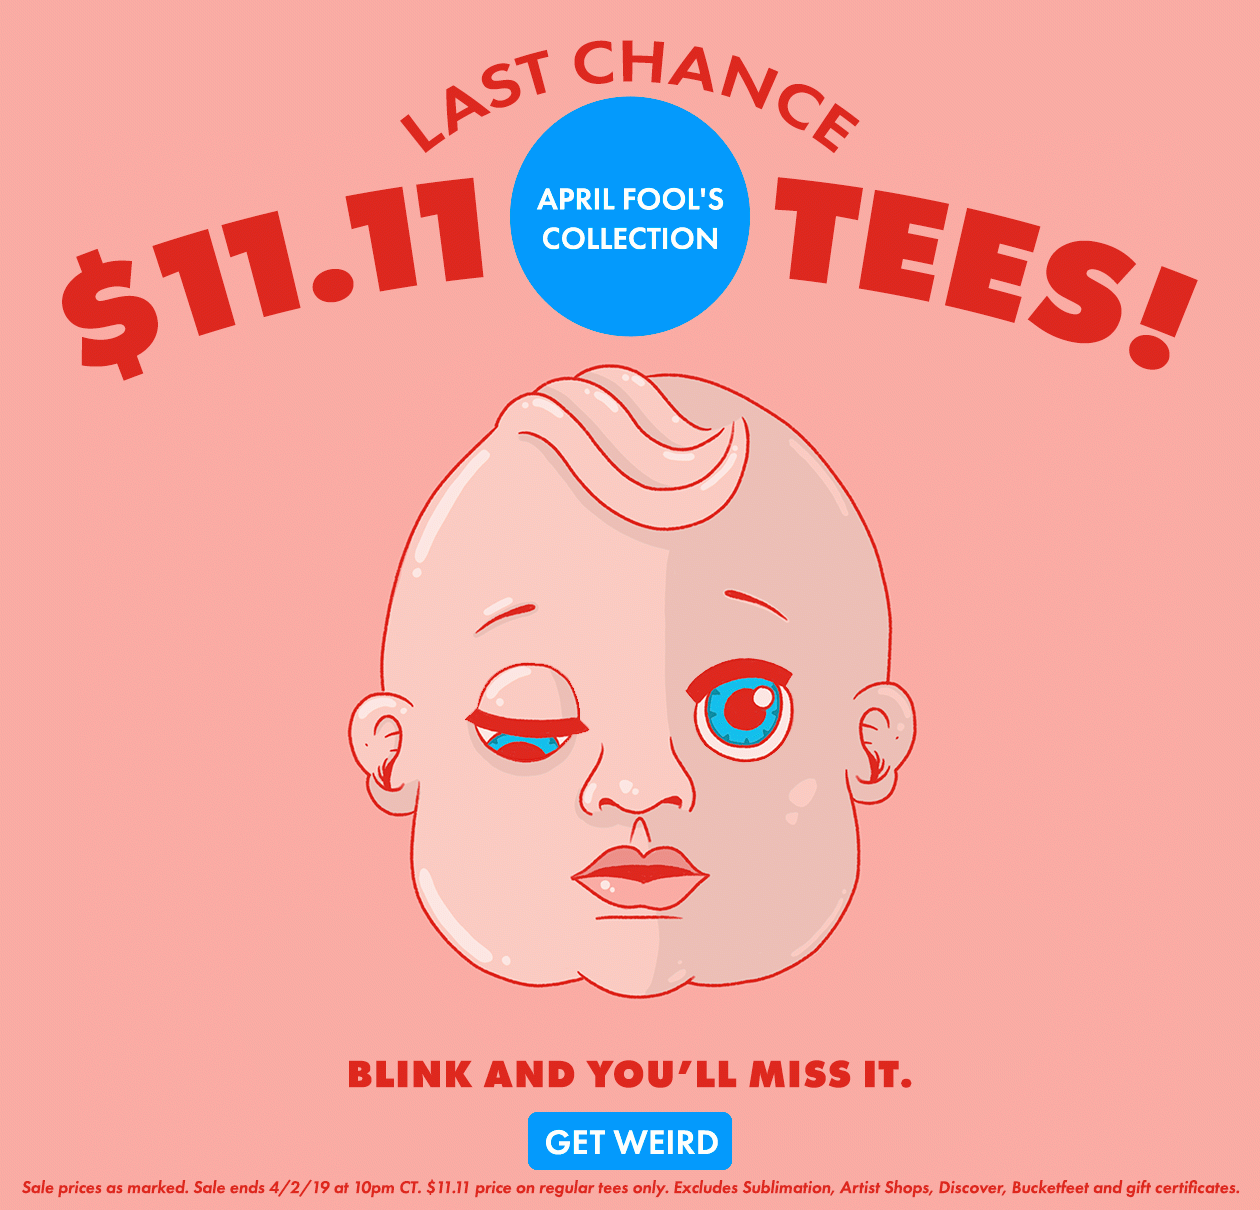 Last Chance for $11.11 April Fool's Tees!